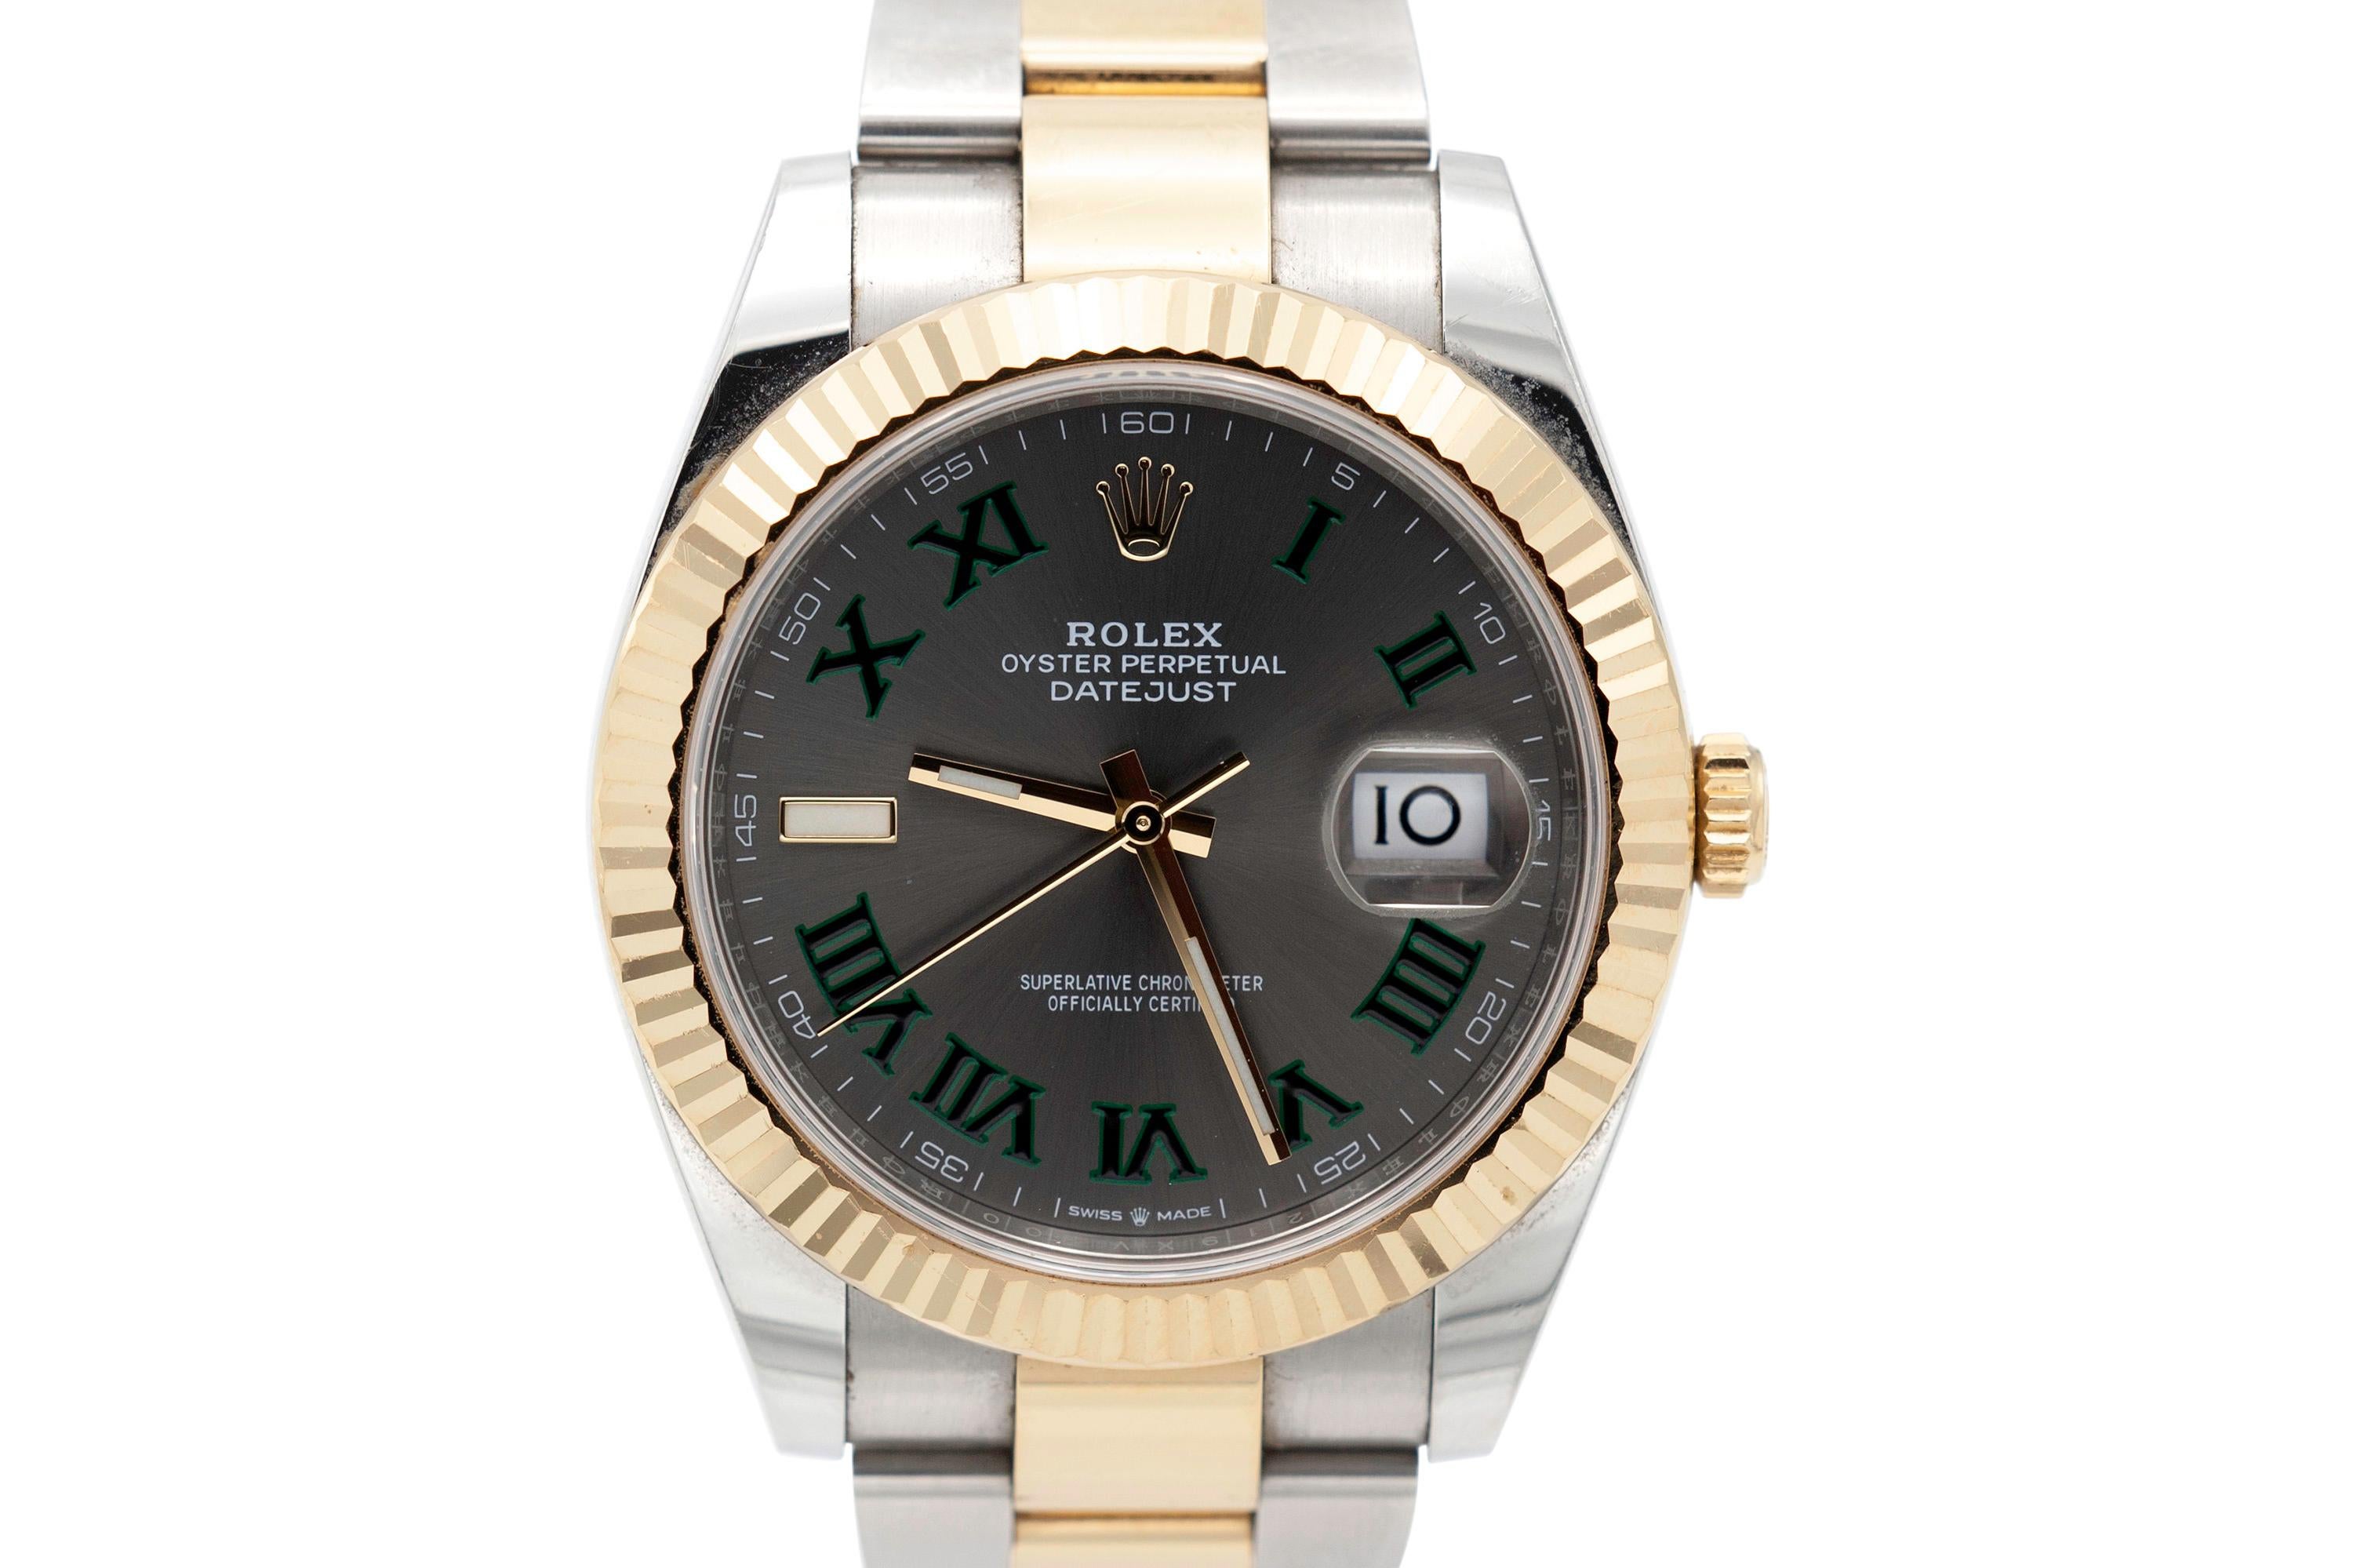 Rolex Oyster Perpetual Datejust men's watch crafted in stainless steel and 18K yellow gold with a 41mm wimbledon roman dial, fluted bezel and oyster band.
Comes with certification (pictured). 
Model 126333. Serial No. 219xv100.